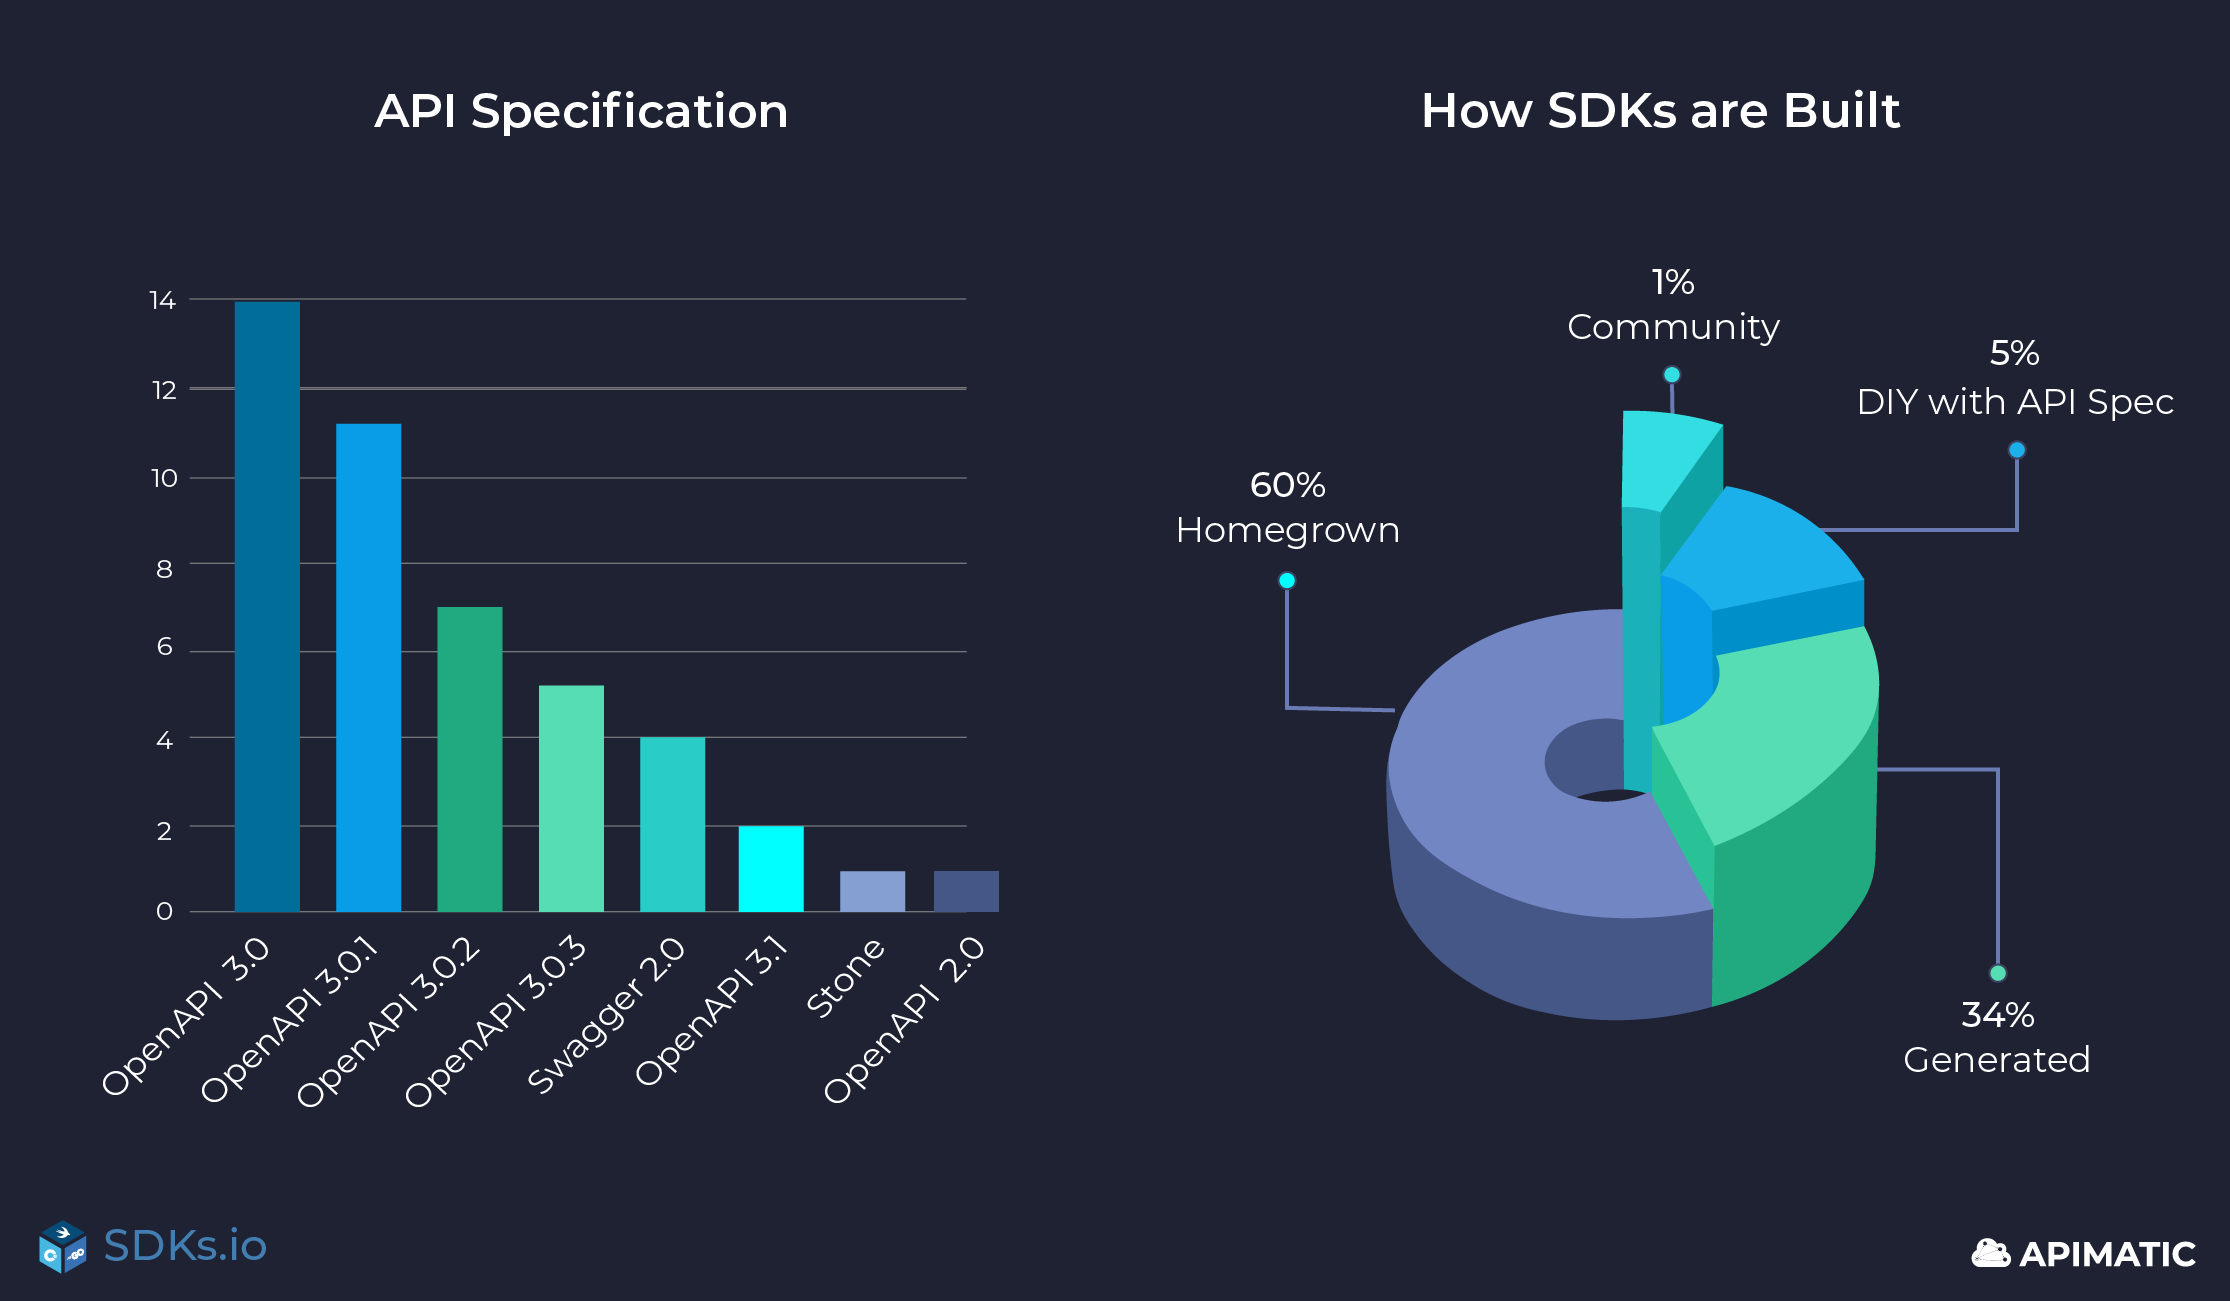 SDK research on API specifications and ways to build